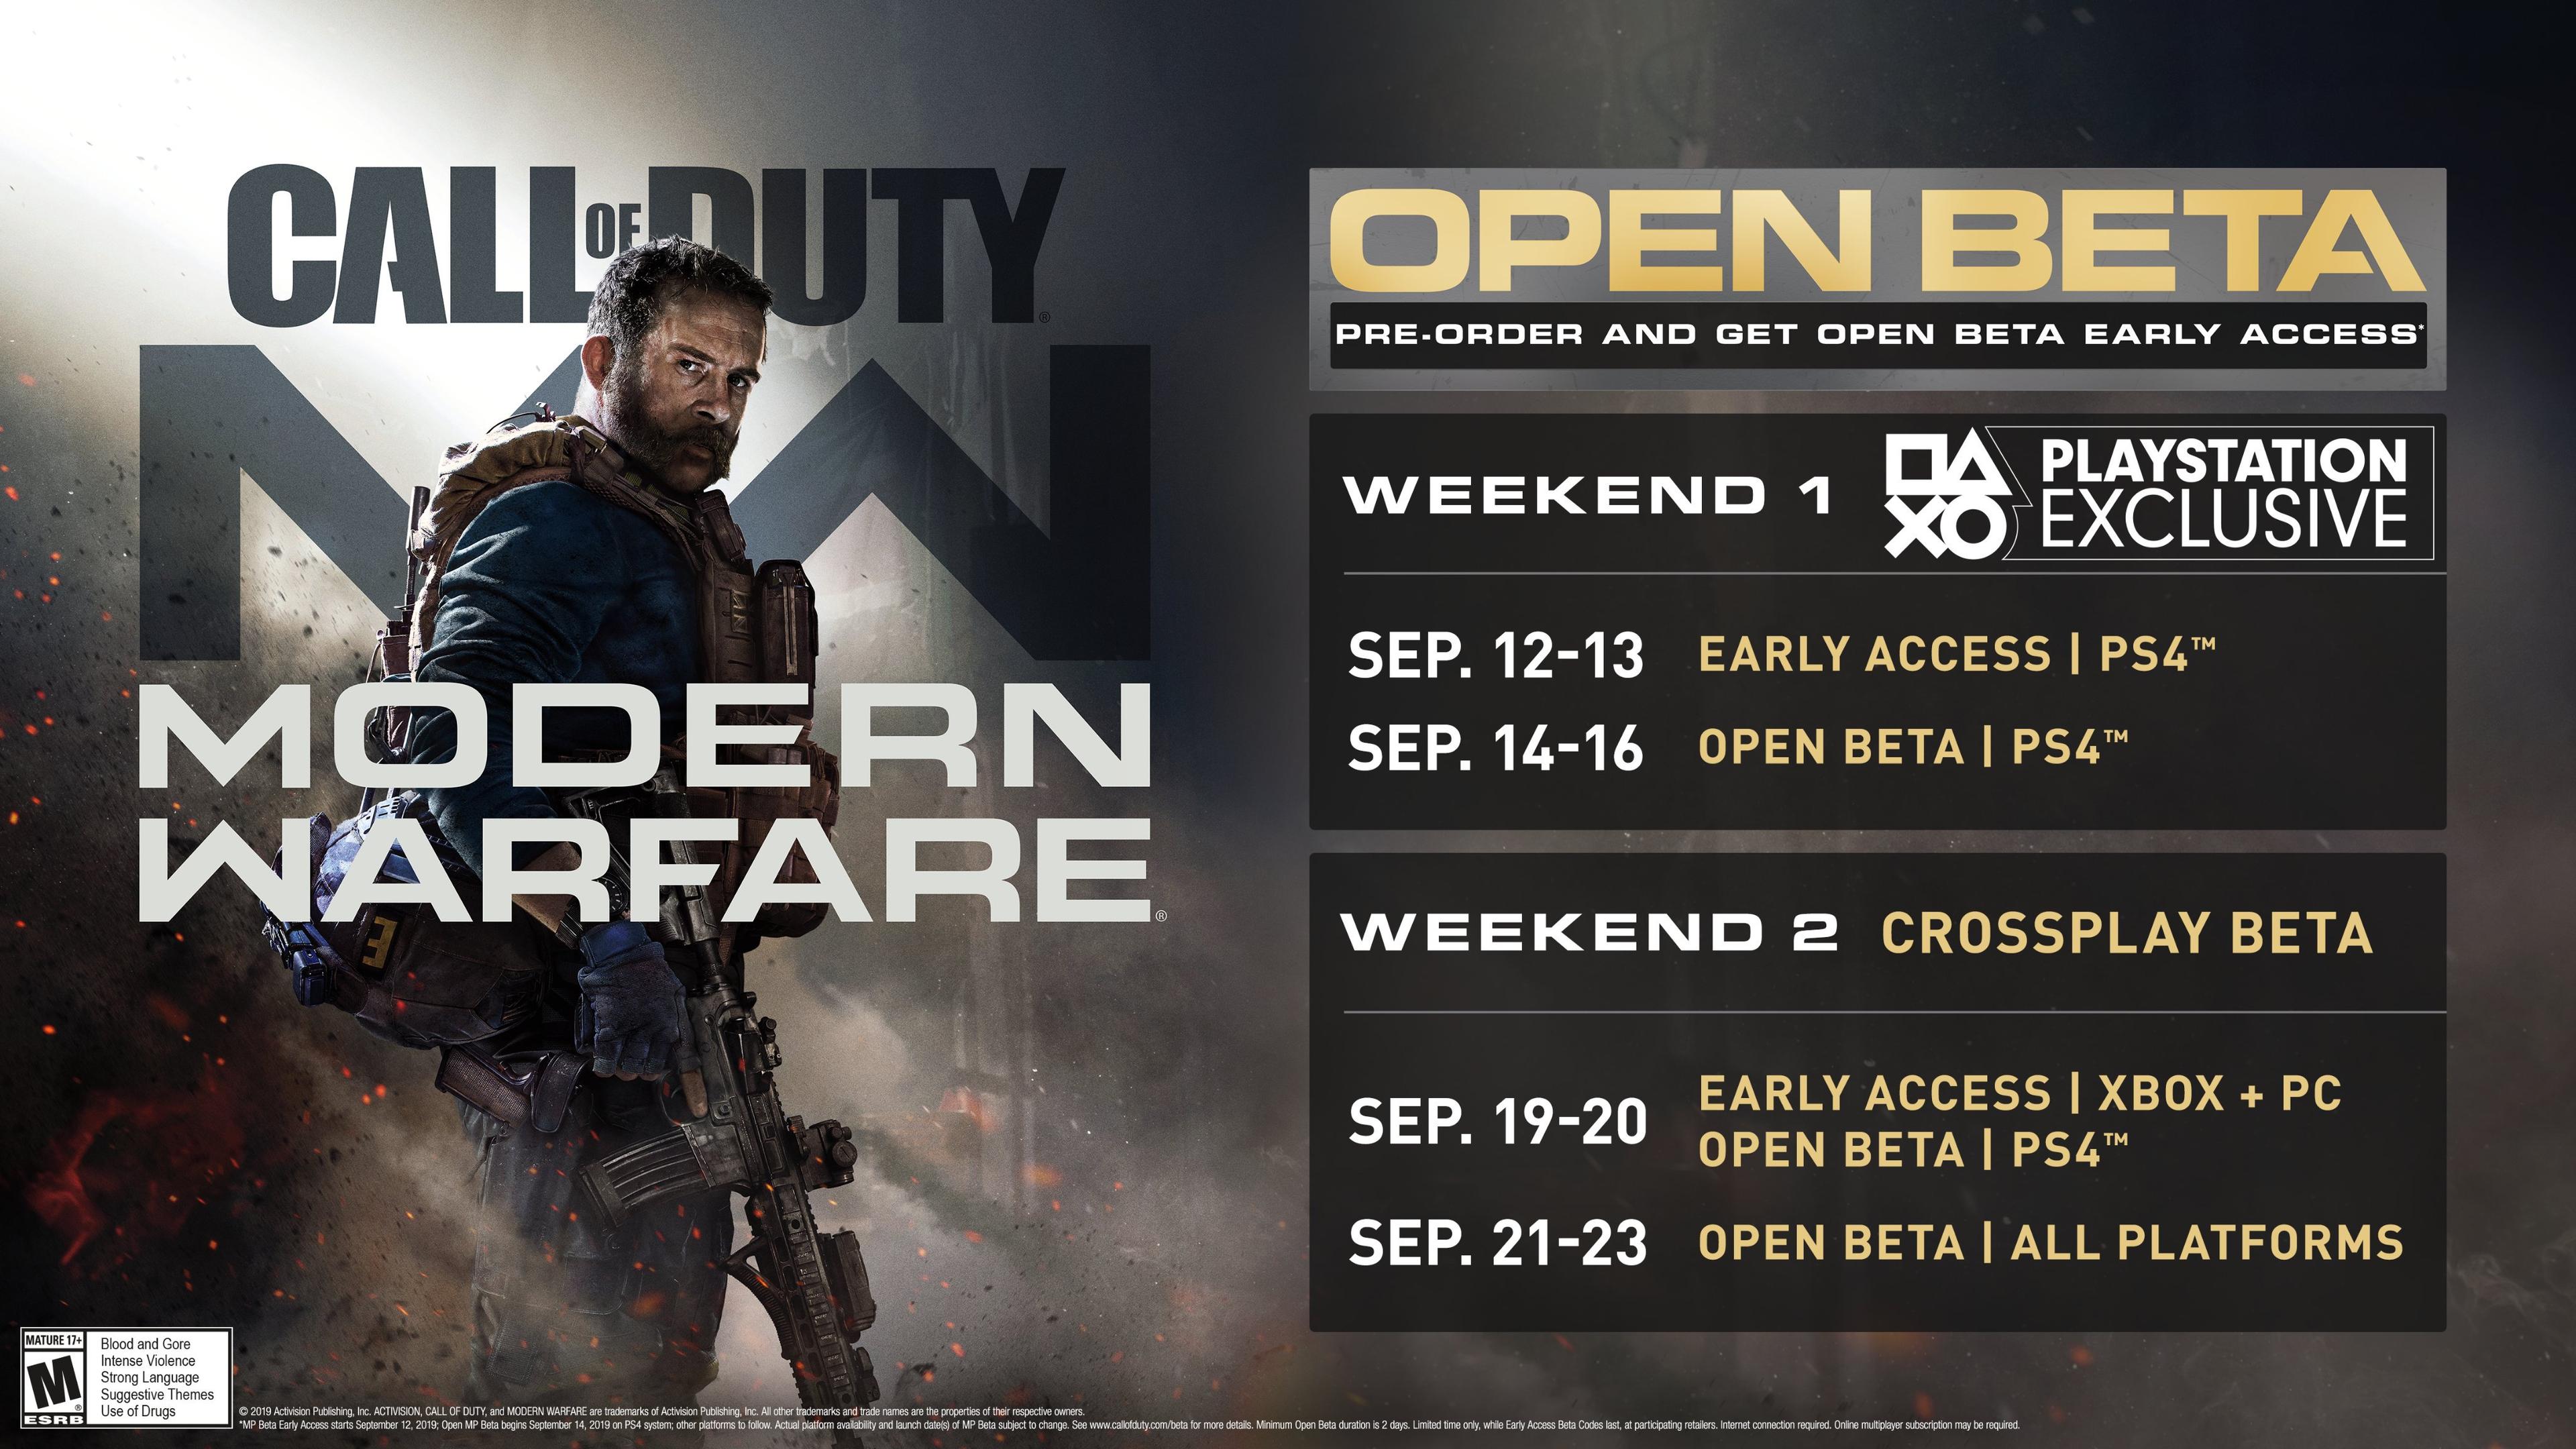 Modern Warfare 3 Open Beta: How to get a code, redeem, and more